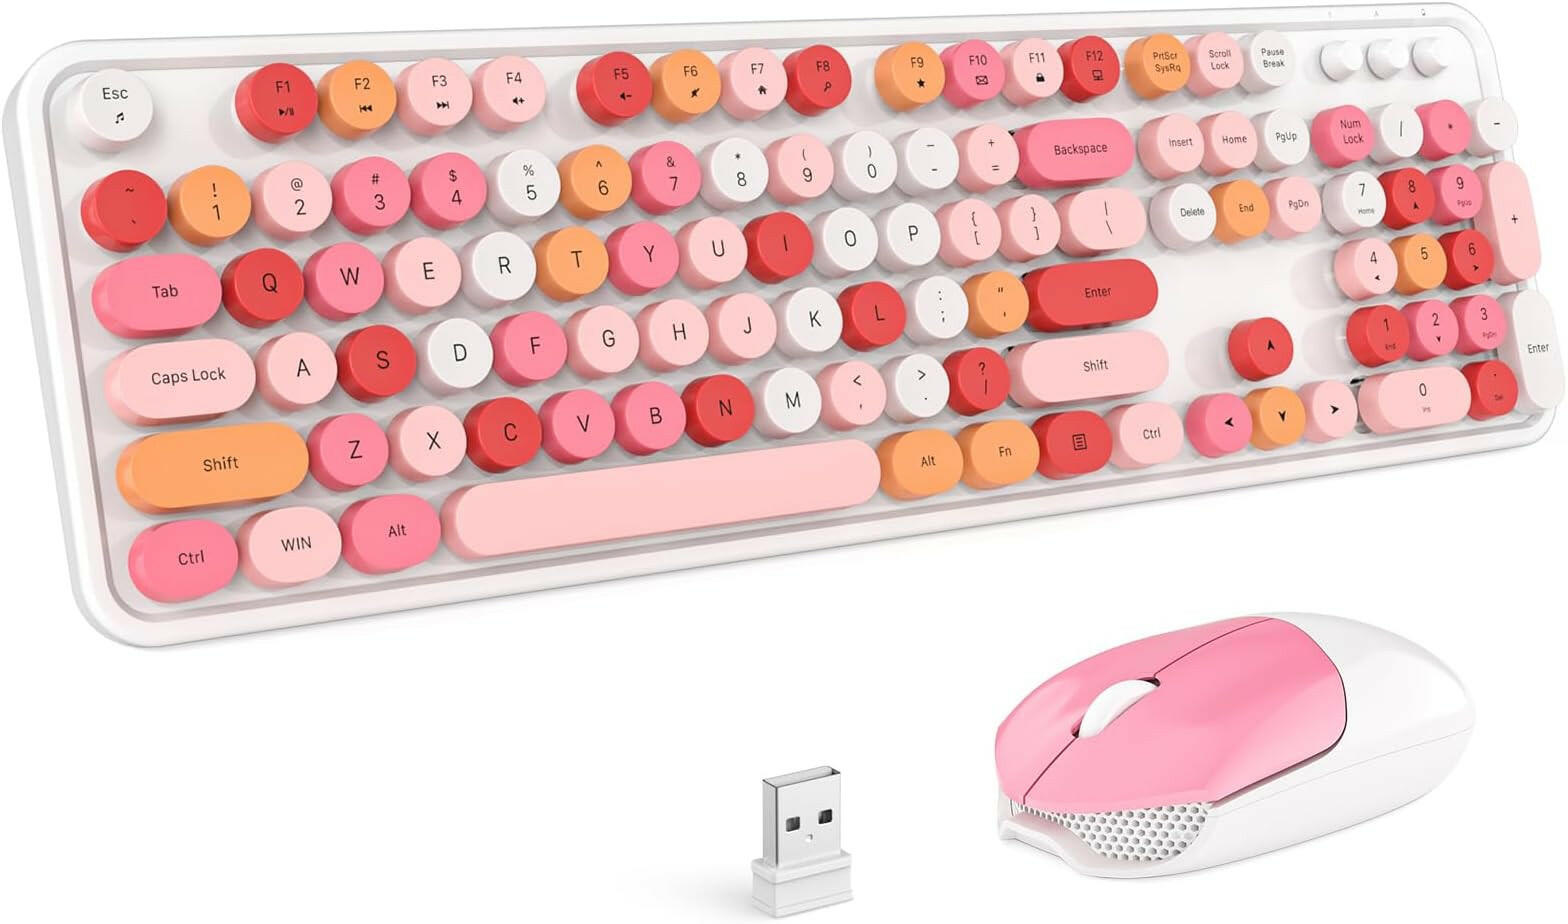 MOFII Wireless Keyboard and Mouse Combo - White Pink - TapElf